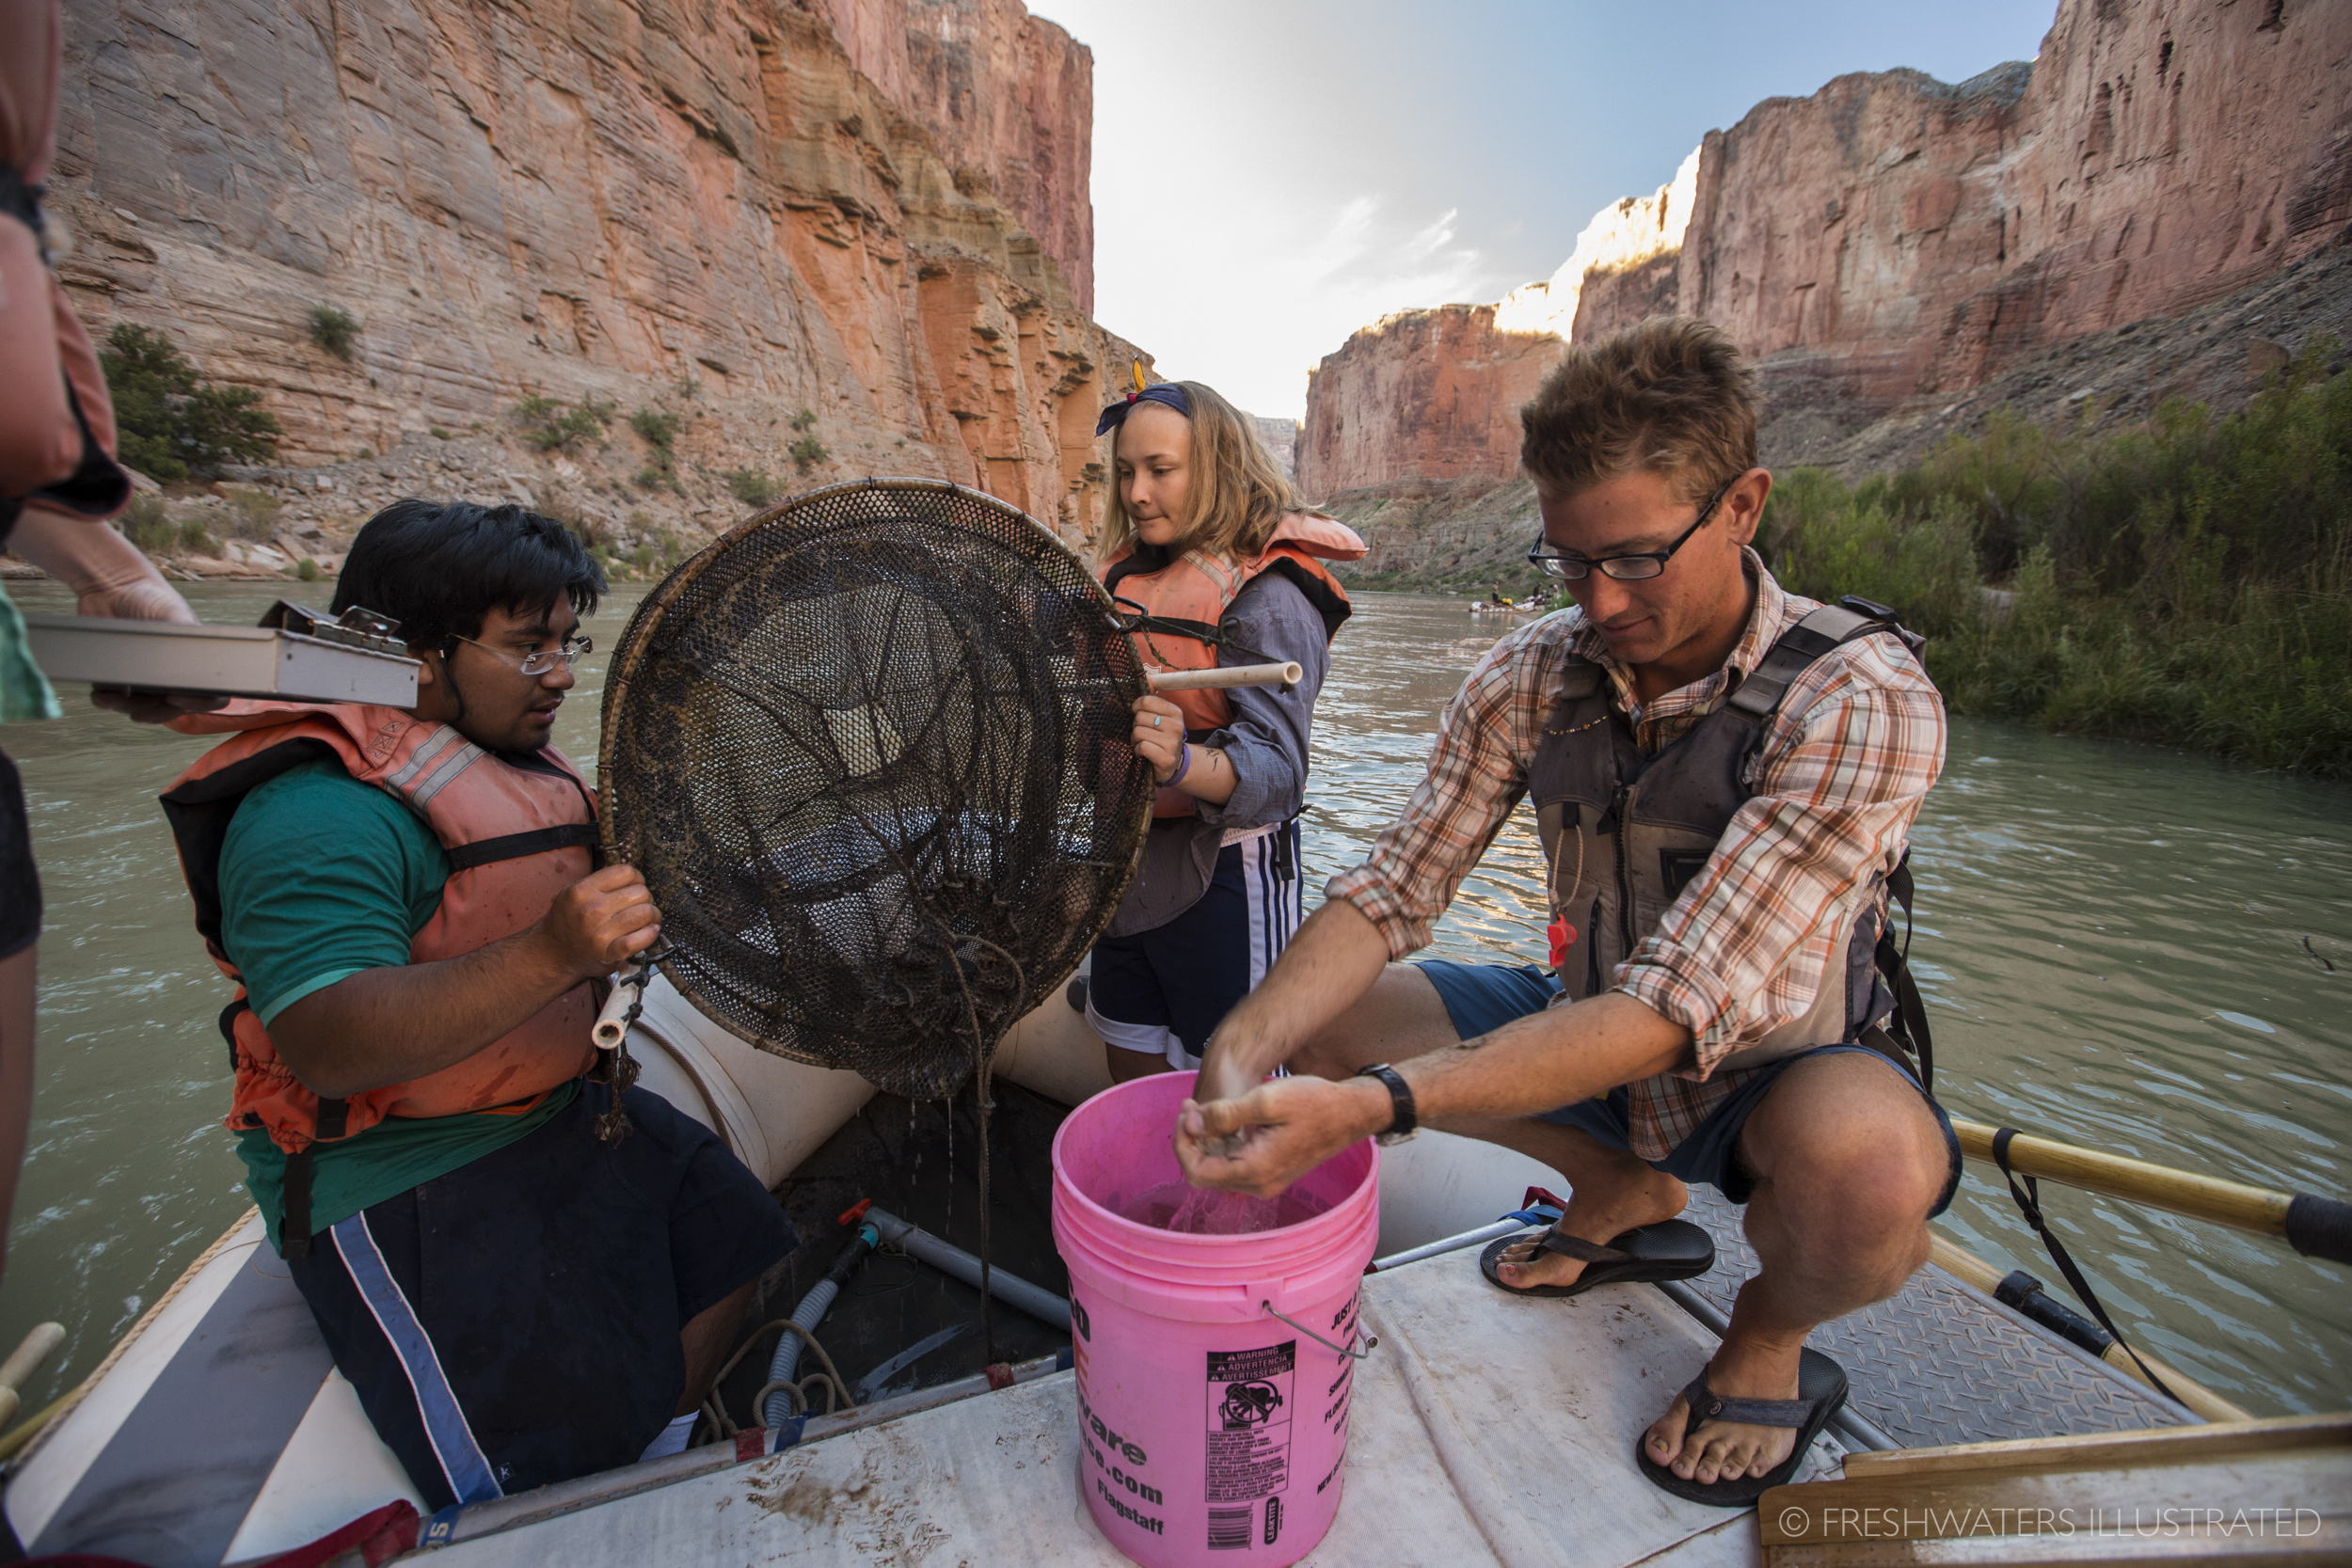  In search of the elusive humpback chub, kids and river guides from the U.S. Geological Survey (USGS) and Grand Canyon Youth check hoop nets to help collect information on the distribution of these rare fish. Data gathered on these youth trips is vit